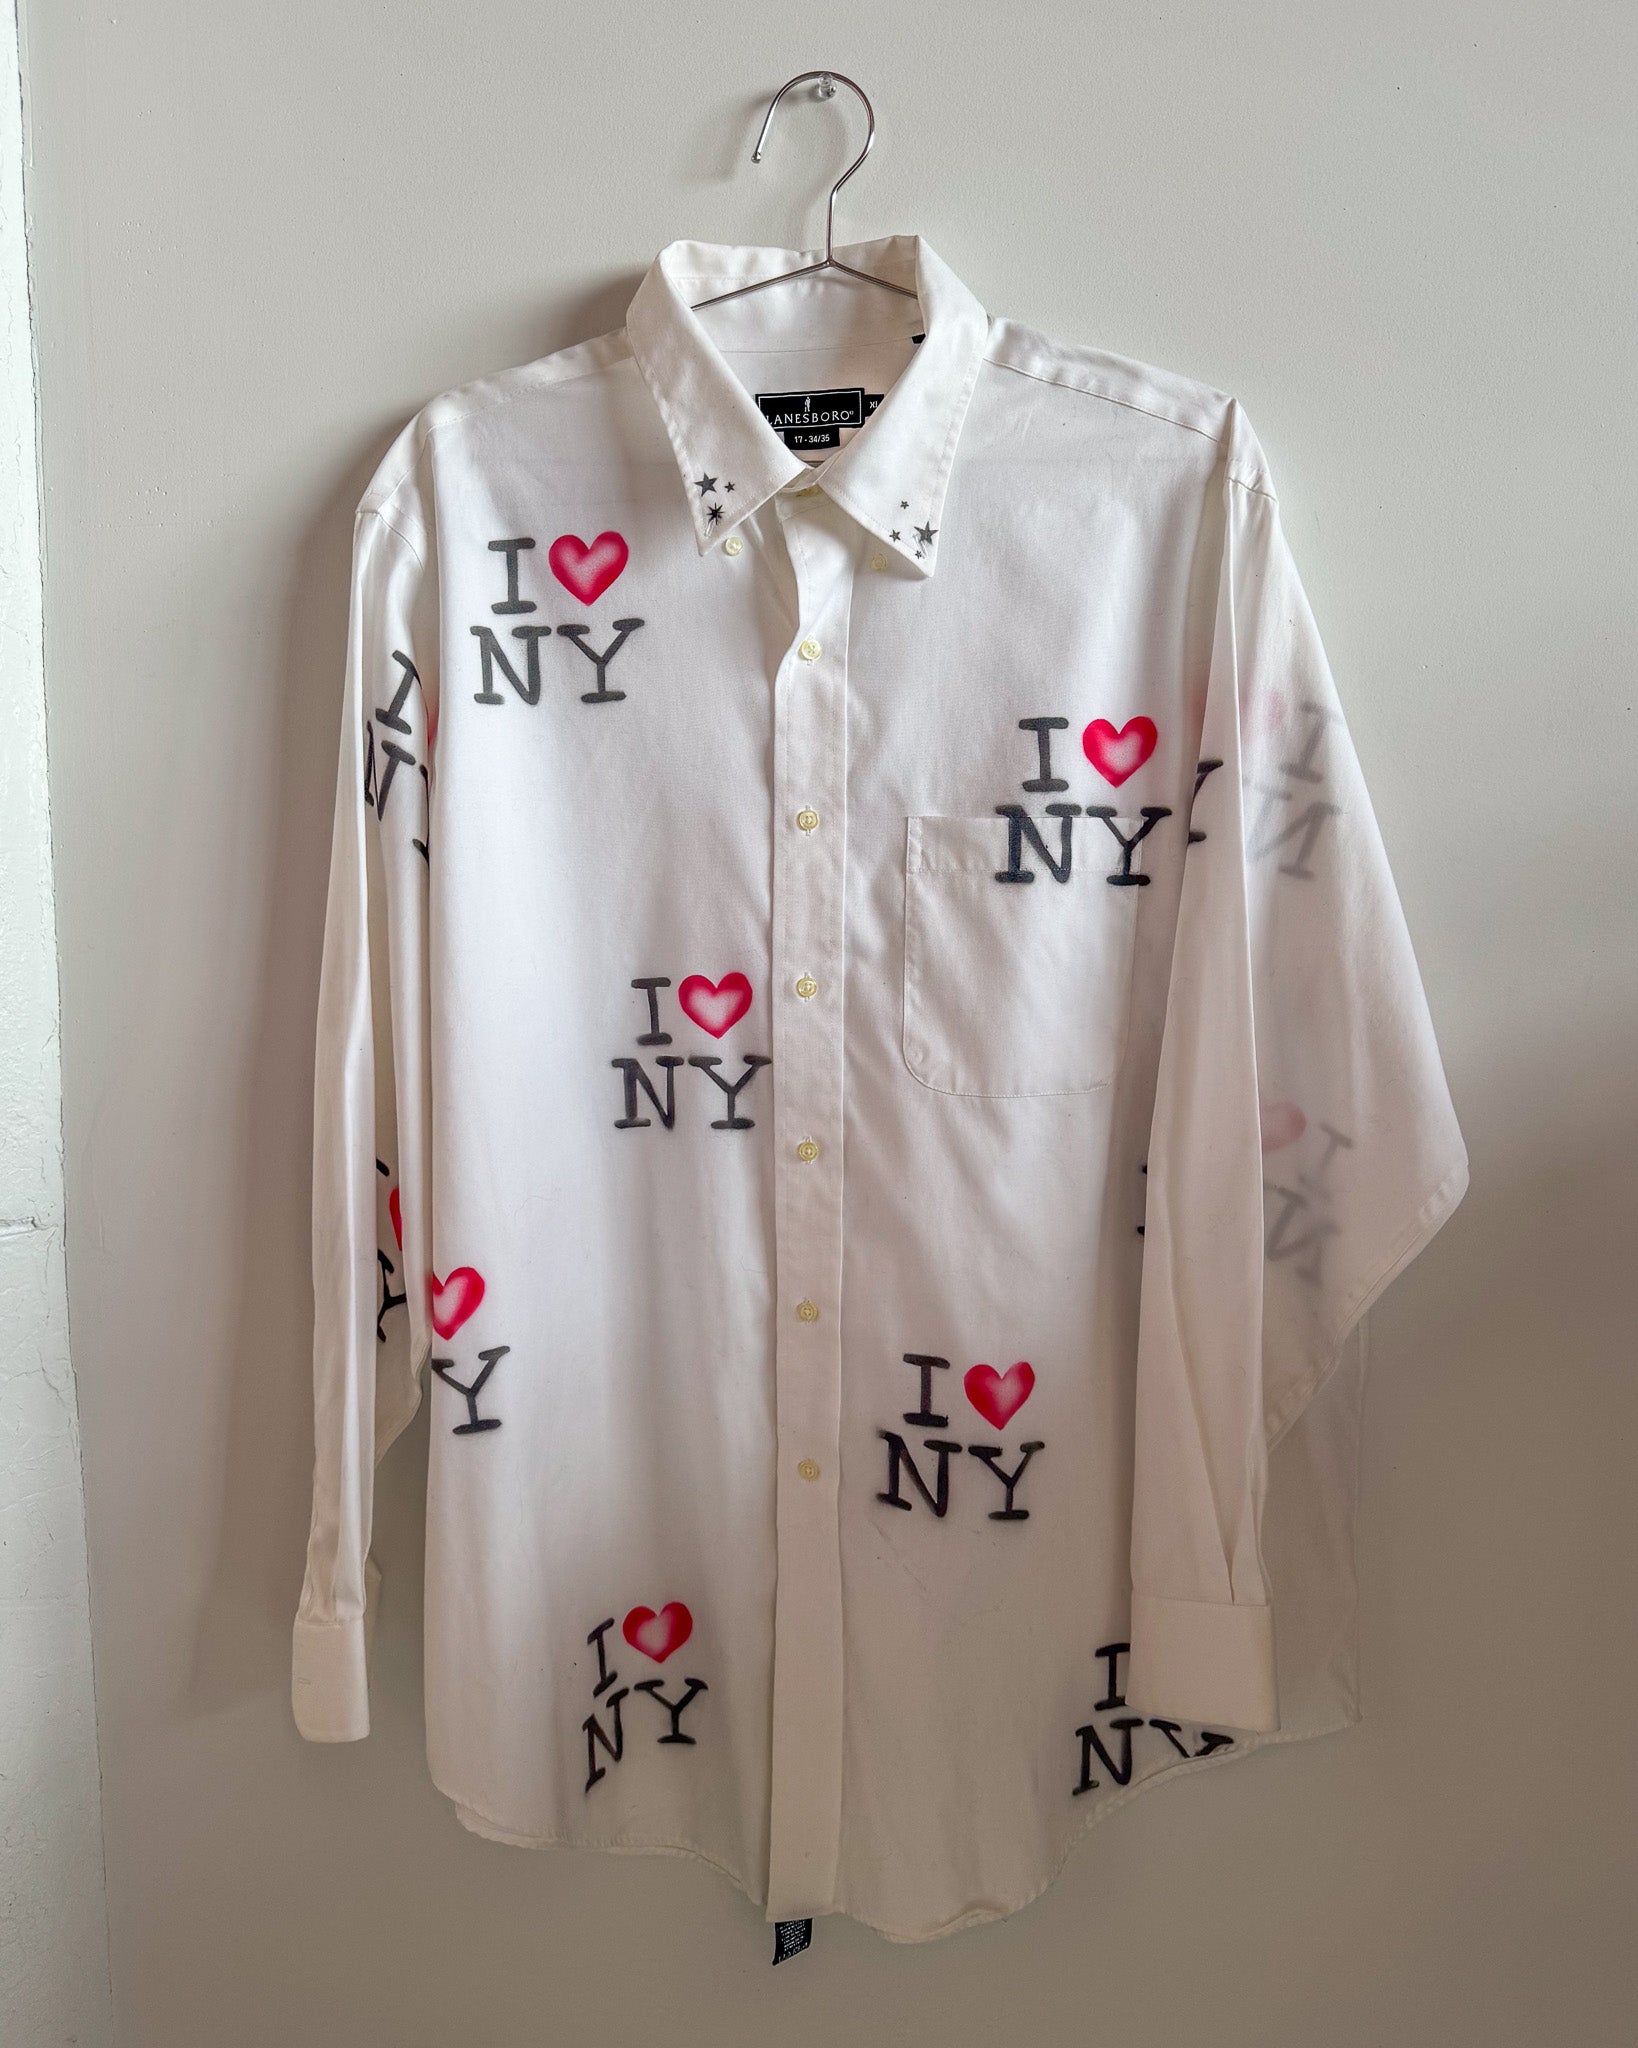 Femlord x BRZ - “I LOVE NY” White Button Down (1X)